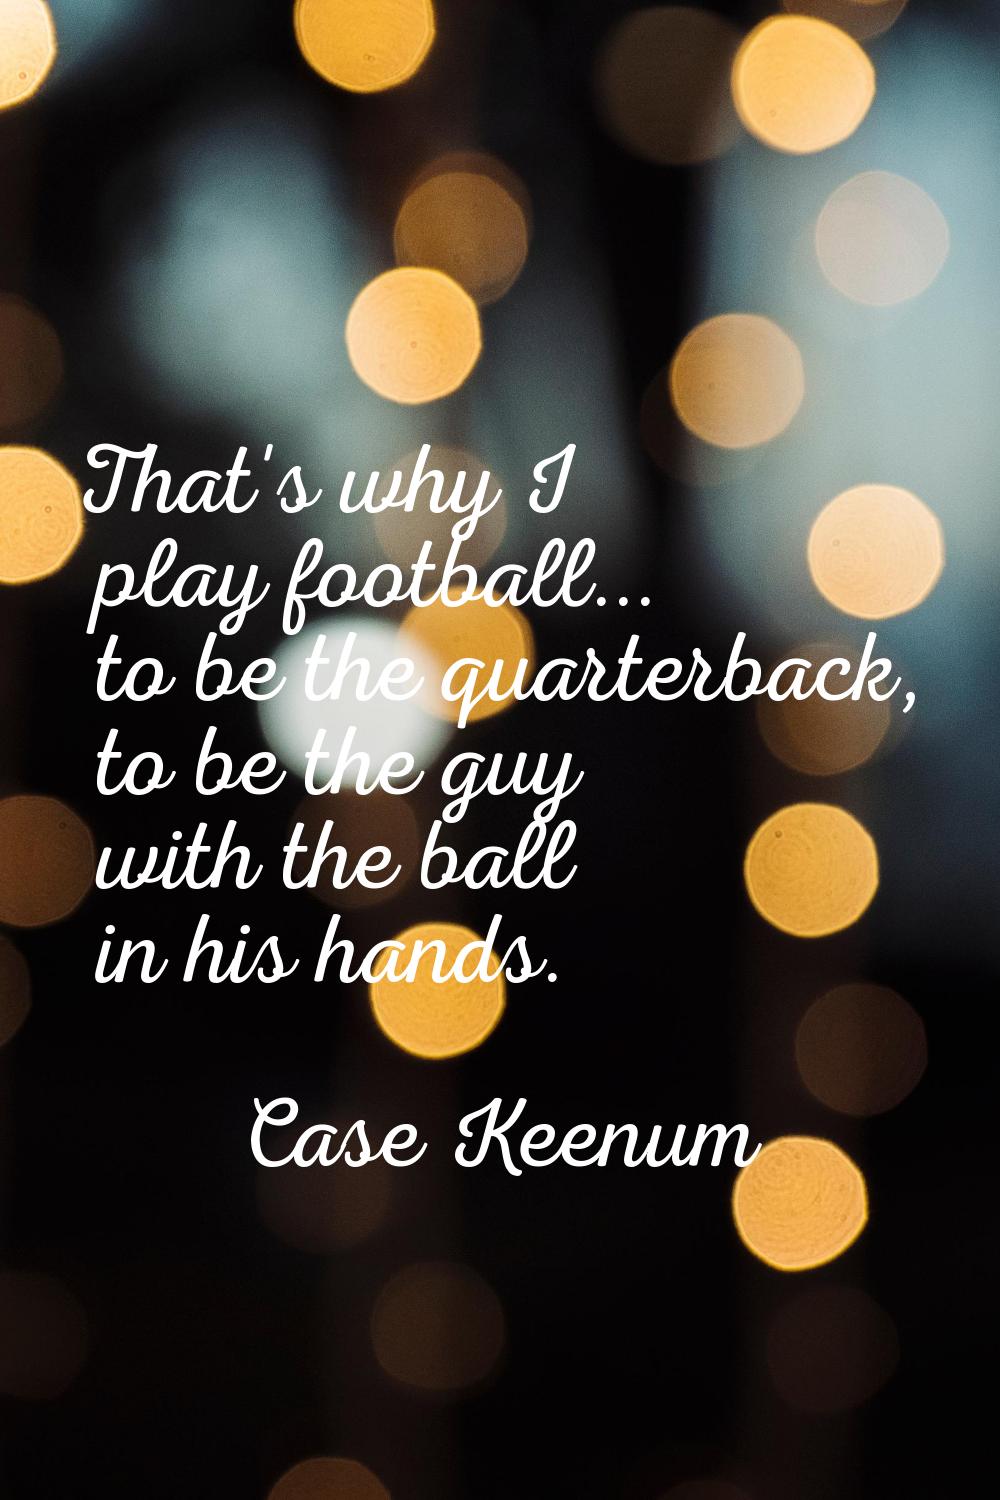 That's why I play football... to be the quarterback, to be the guy with the ball in his hands.